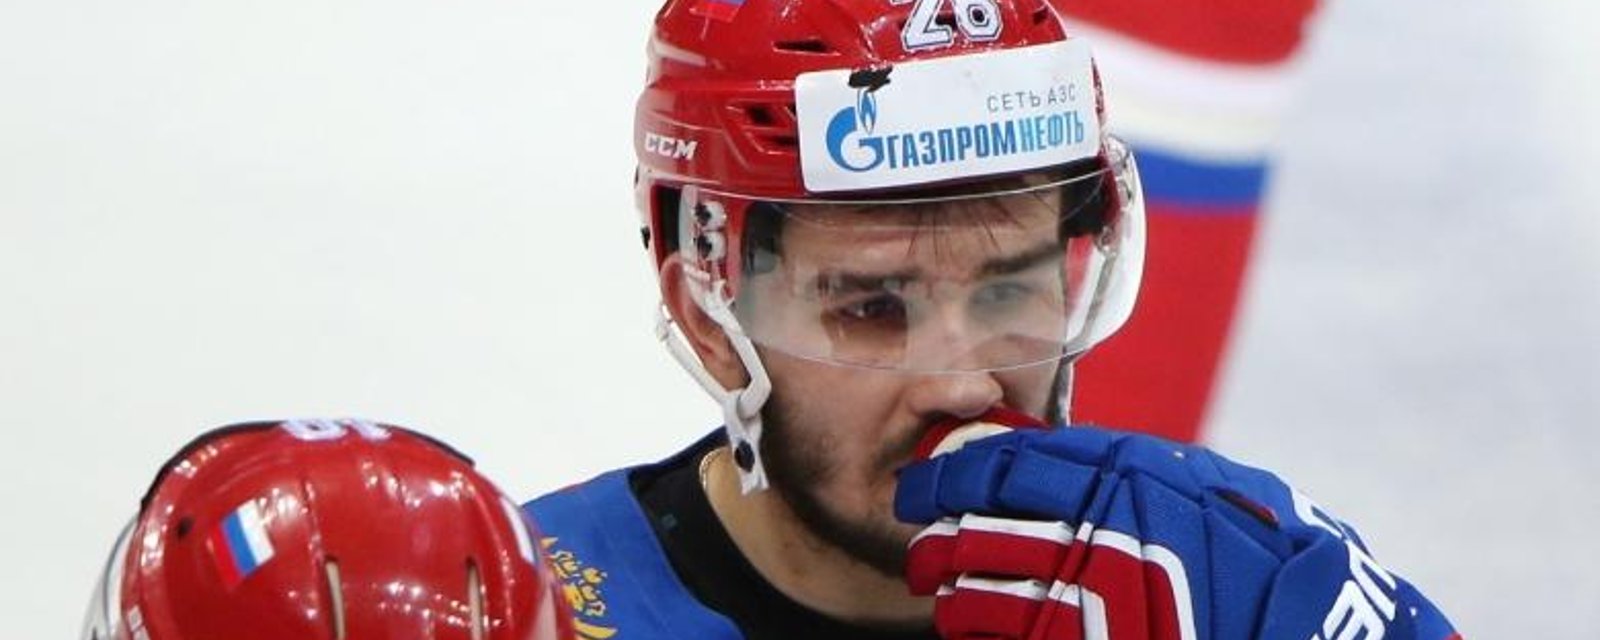 Russia negotiating with NHL to allow convicted criminal to play in World Cup.